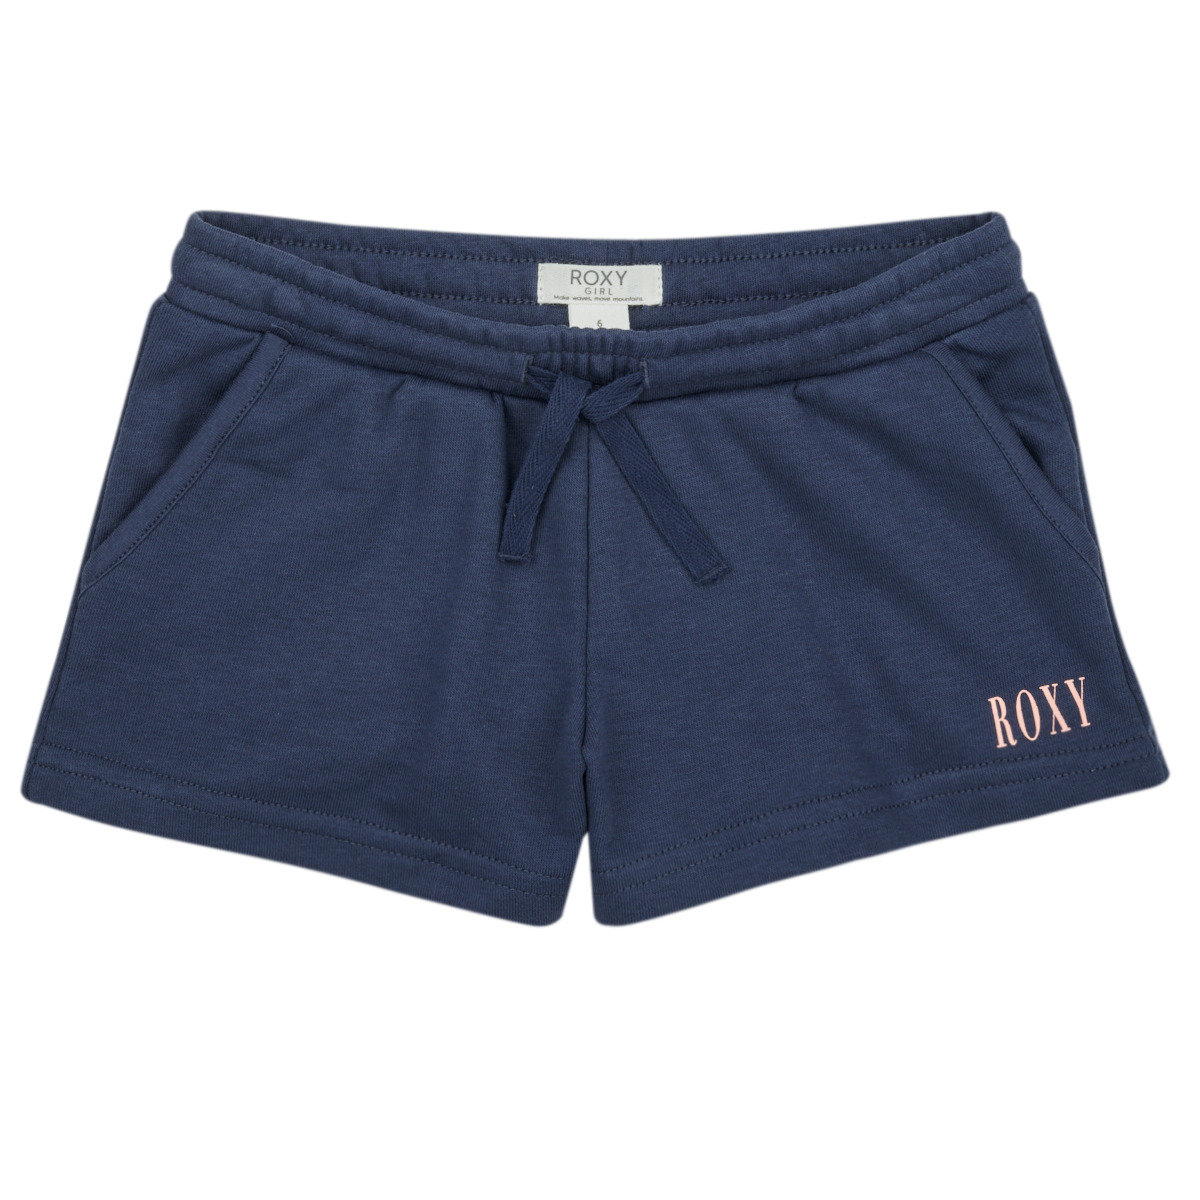 - SHORT - Clothing delivery Child Marine / Spartoo ORIGIN Free NET ! Roxy | Shorts FOREVER HAPPINESS Bermudas